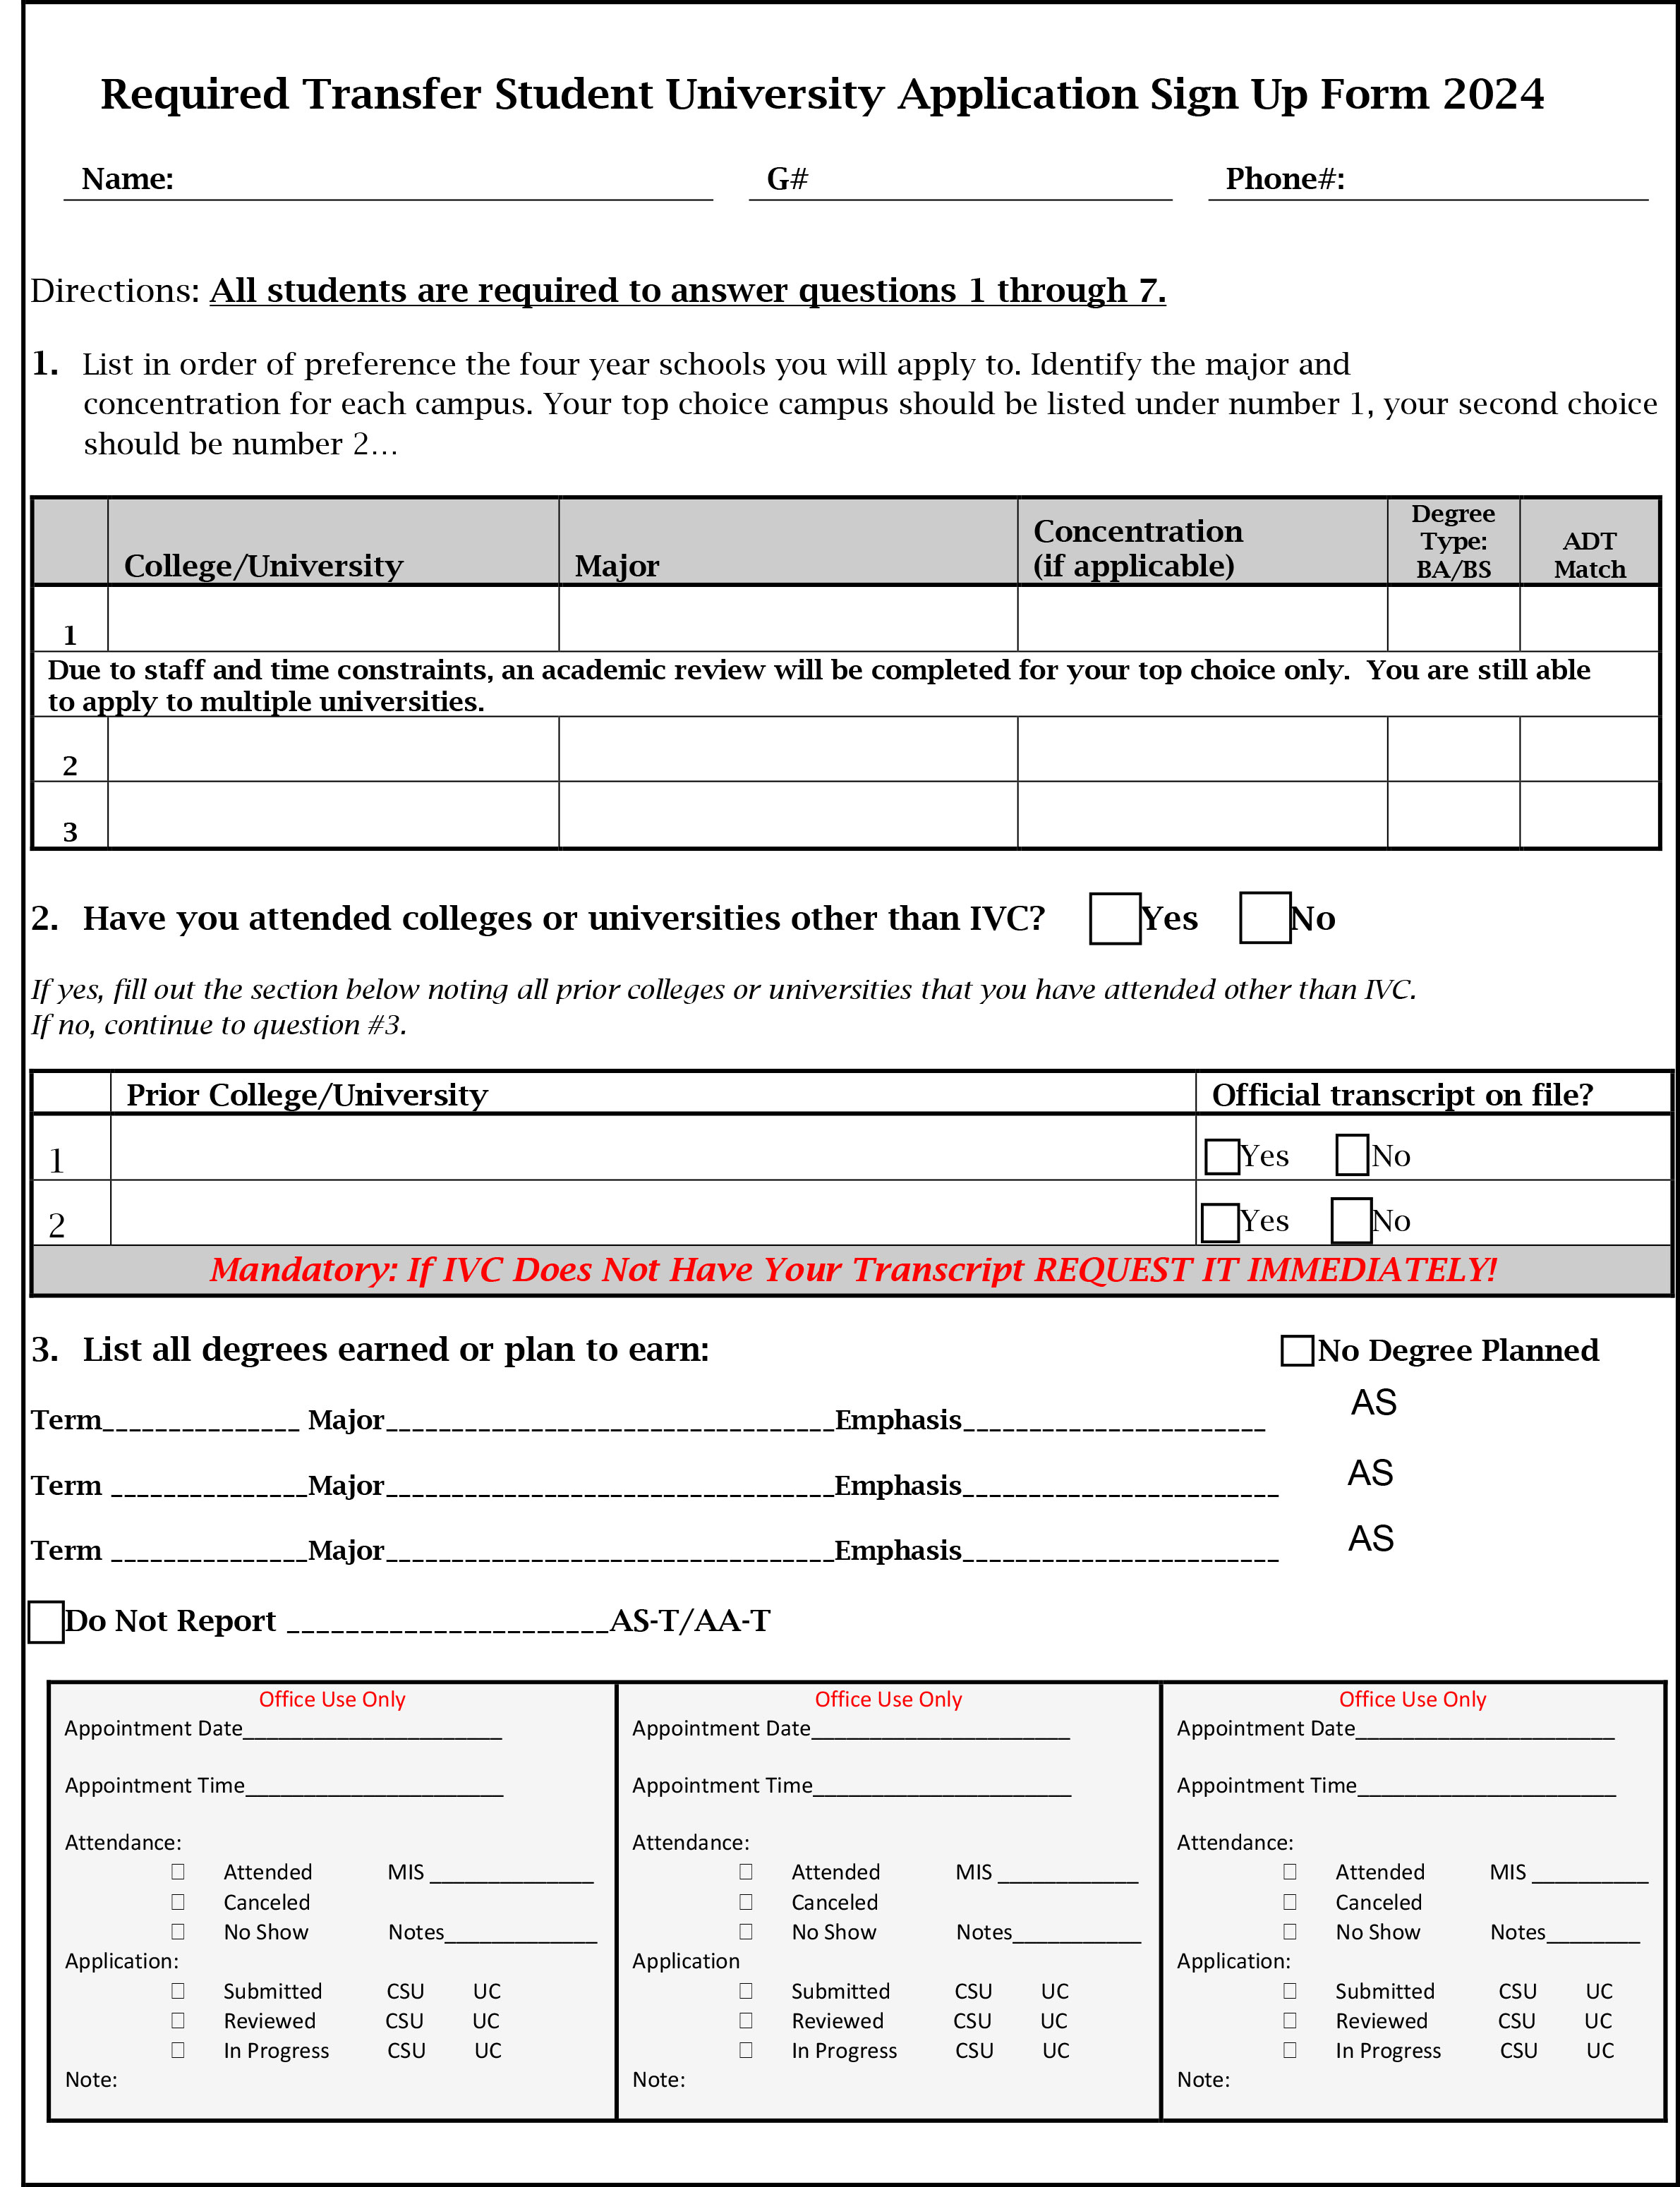 2024 Required Transfer Student University Application Sign up Form Fillable 1 1